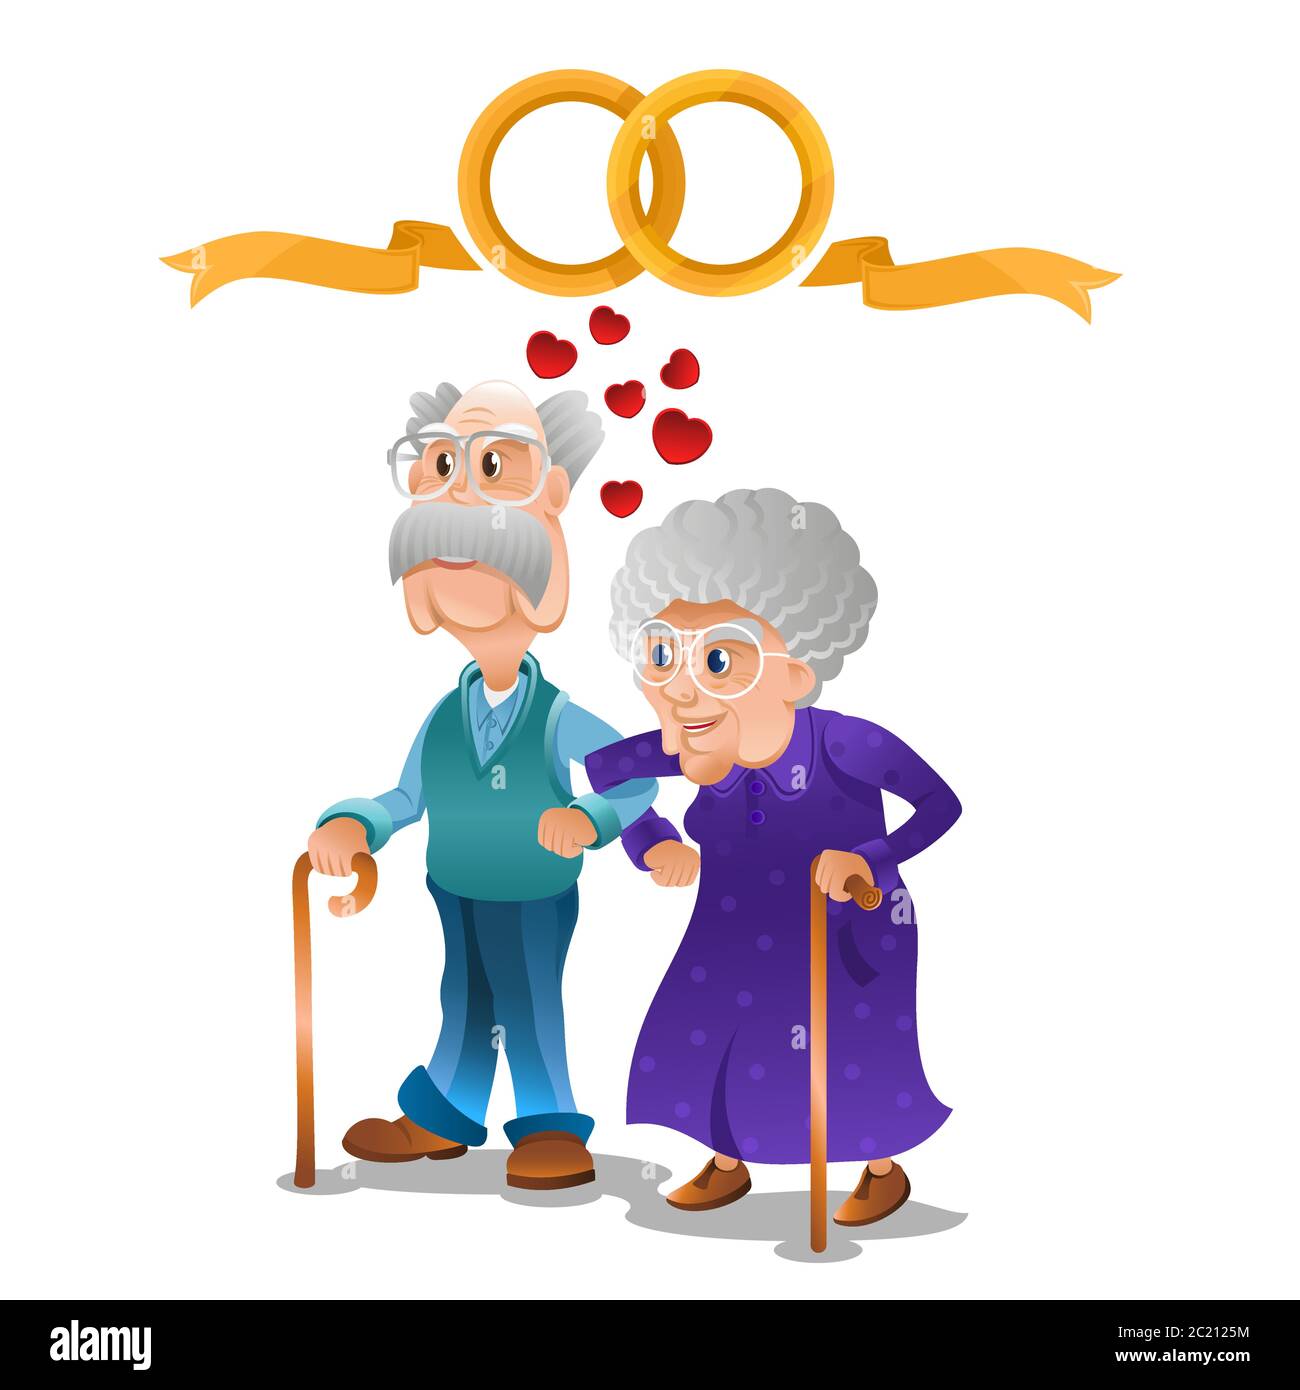 Old Grandma And Grandpa Stand Together Arm In Arm Couple With Two Crossed Golden Rings Above